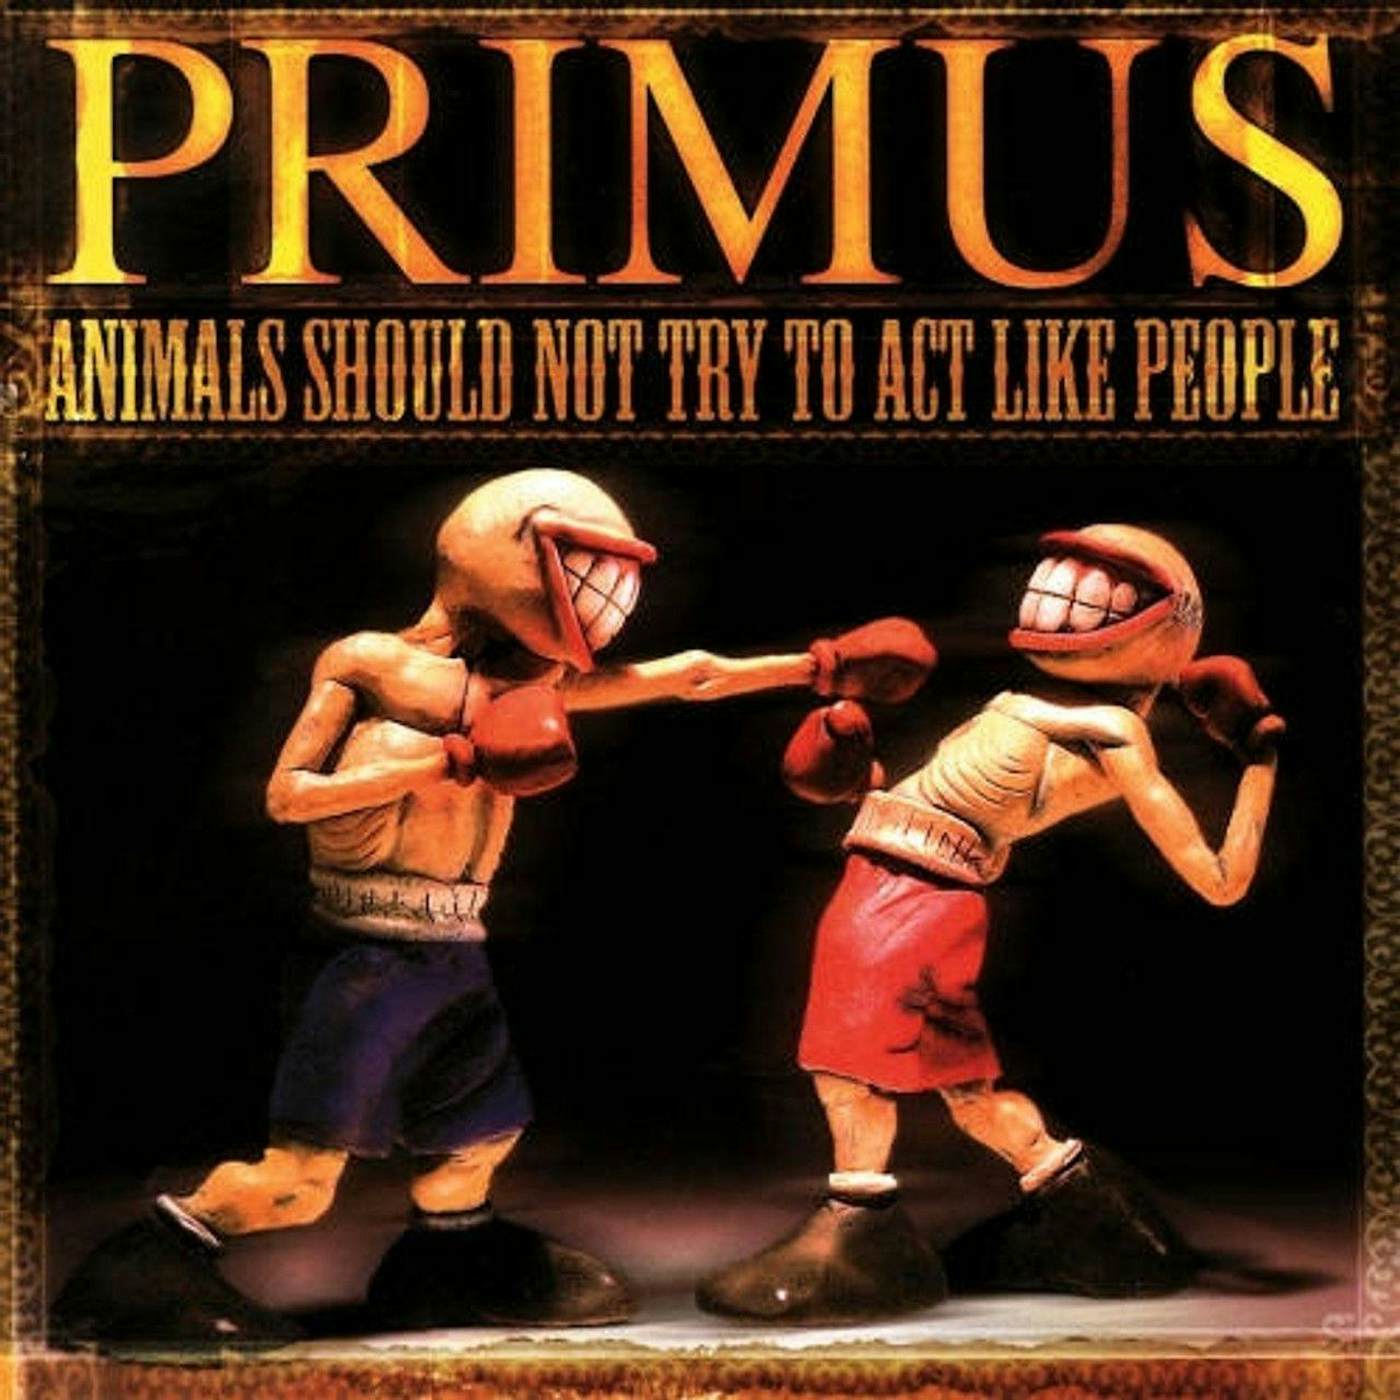 Primus Animals Should Not Try To Act Like People Vinyl Record